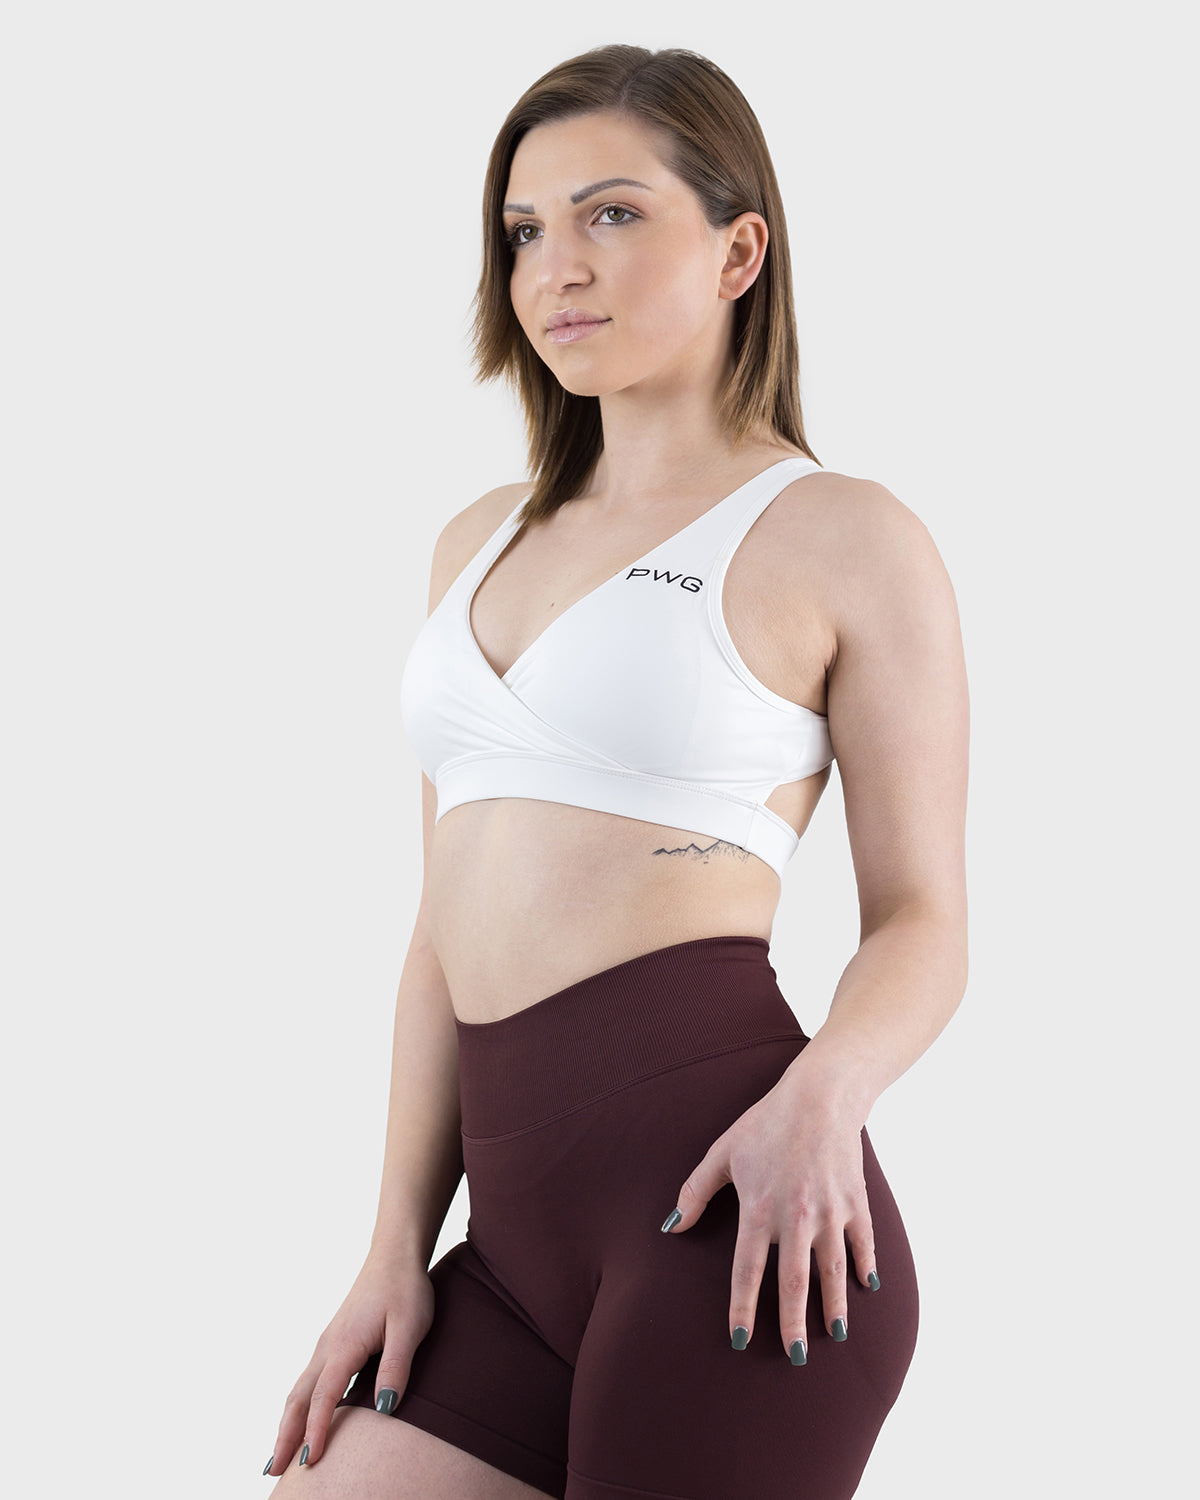 Whiten spandex bras with the right products to avoid damaging the fabric.